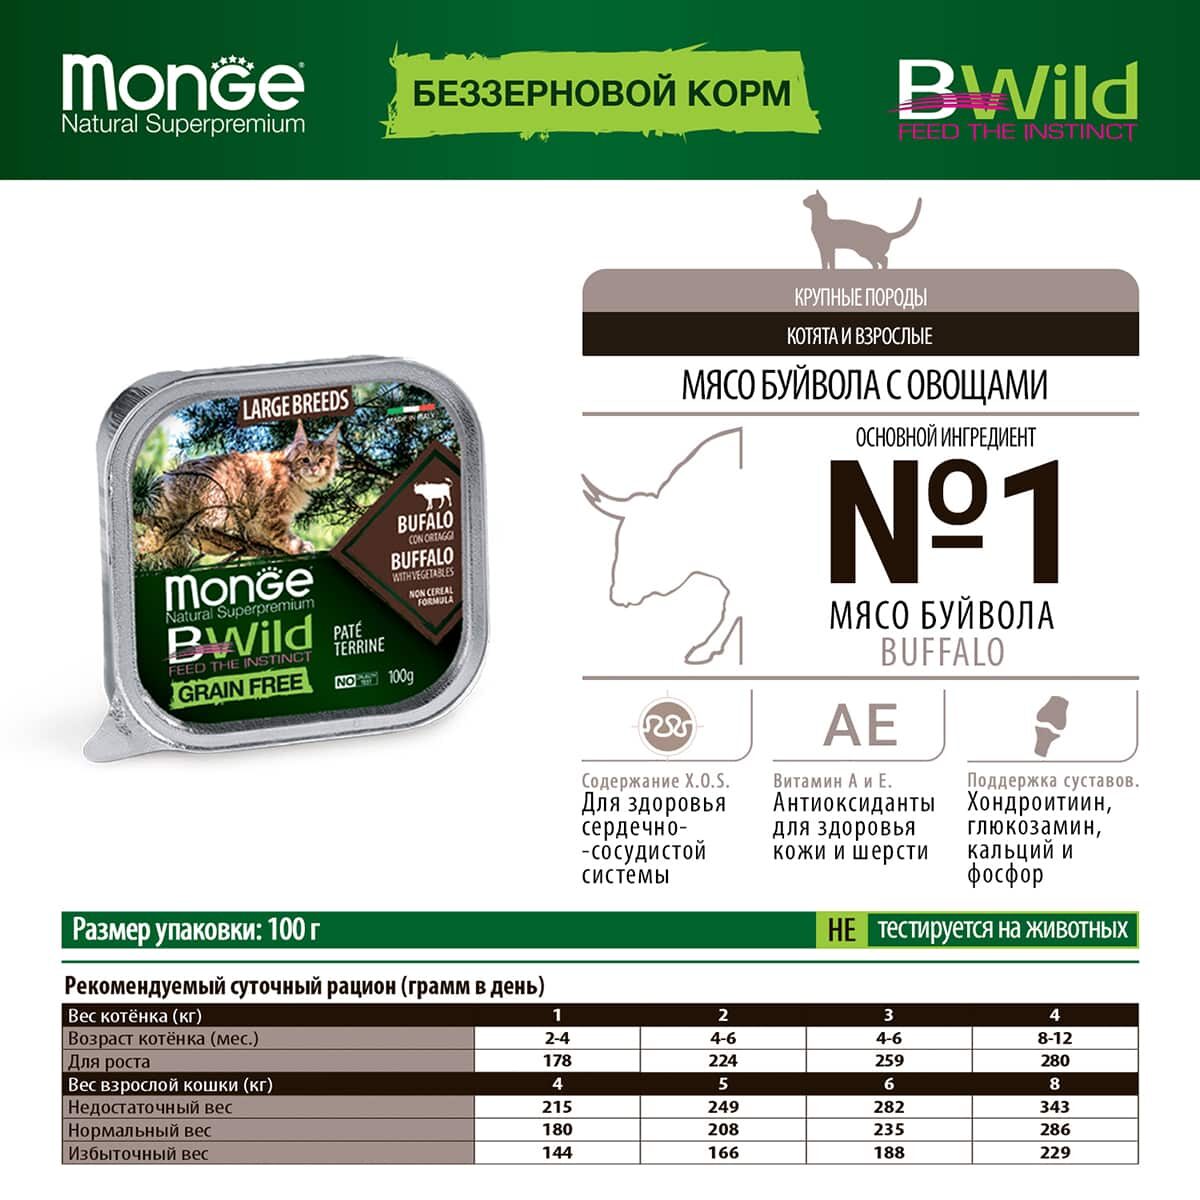 Monge Cat BWild Grain free Large Breeds Buffalo with vegetables (100г)